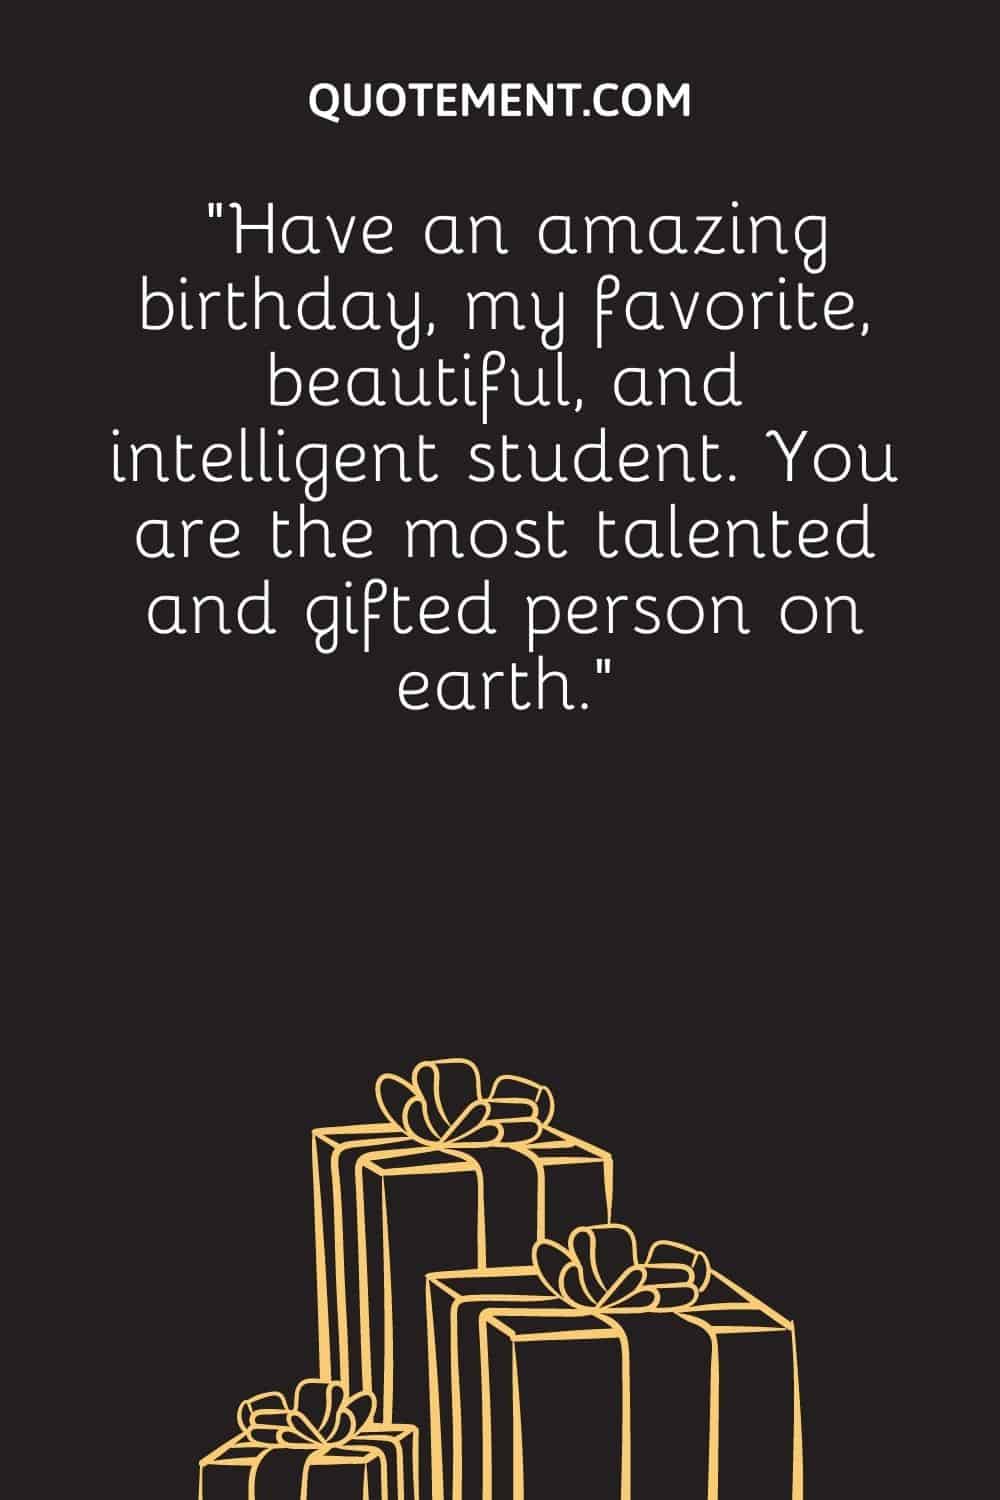 “Have an amazing birthday, my favorite, beautiful, and intelligent student. You are the most talented and gifted person on earth.”